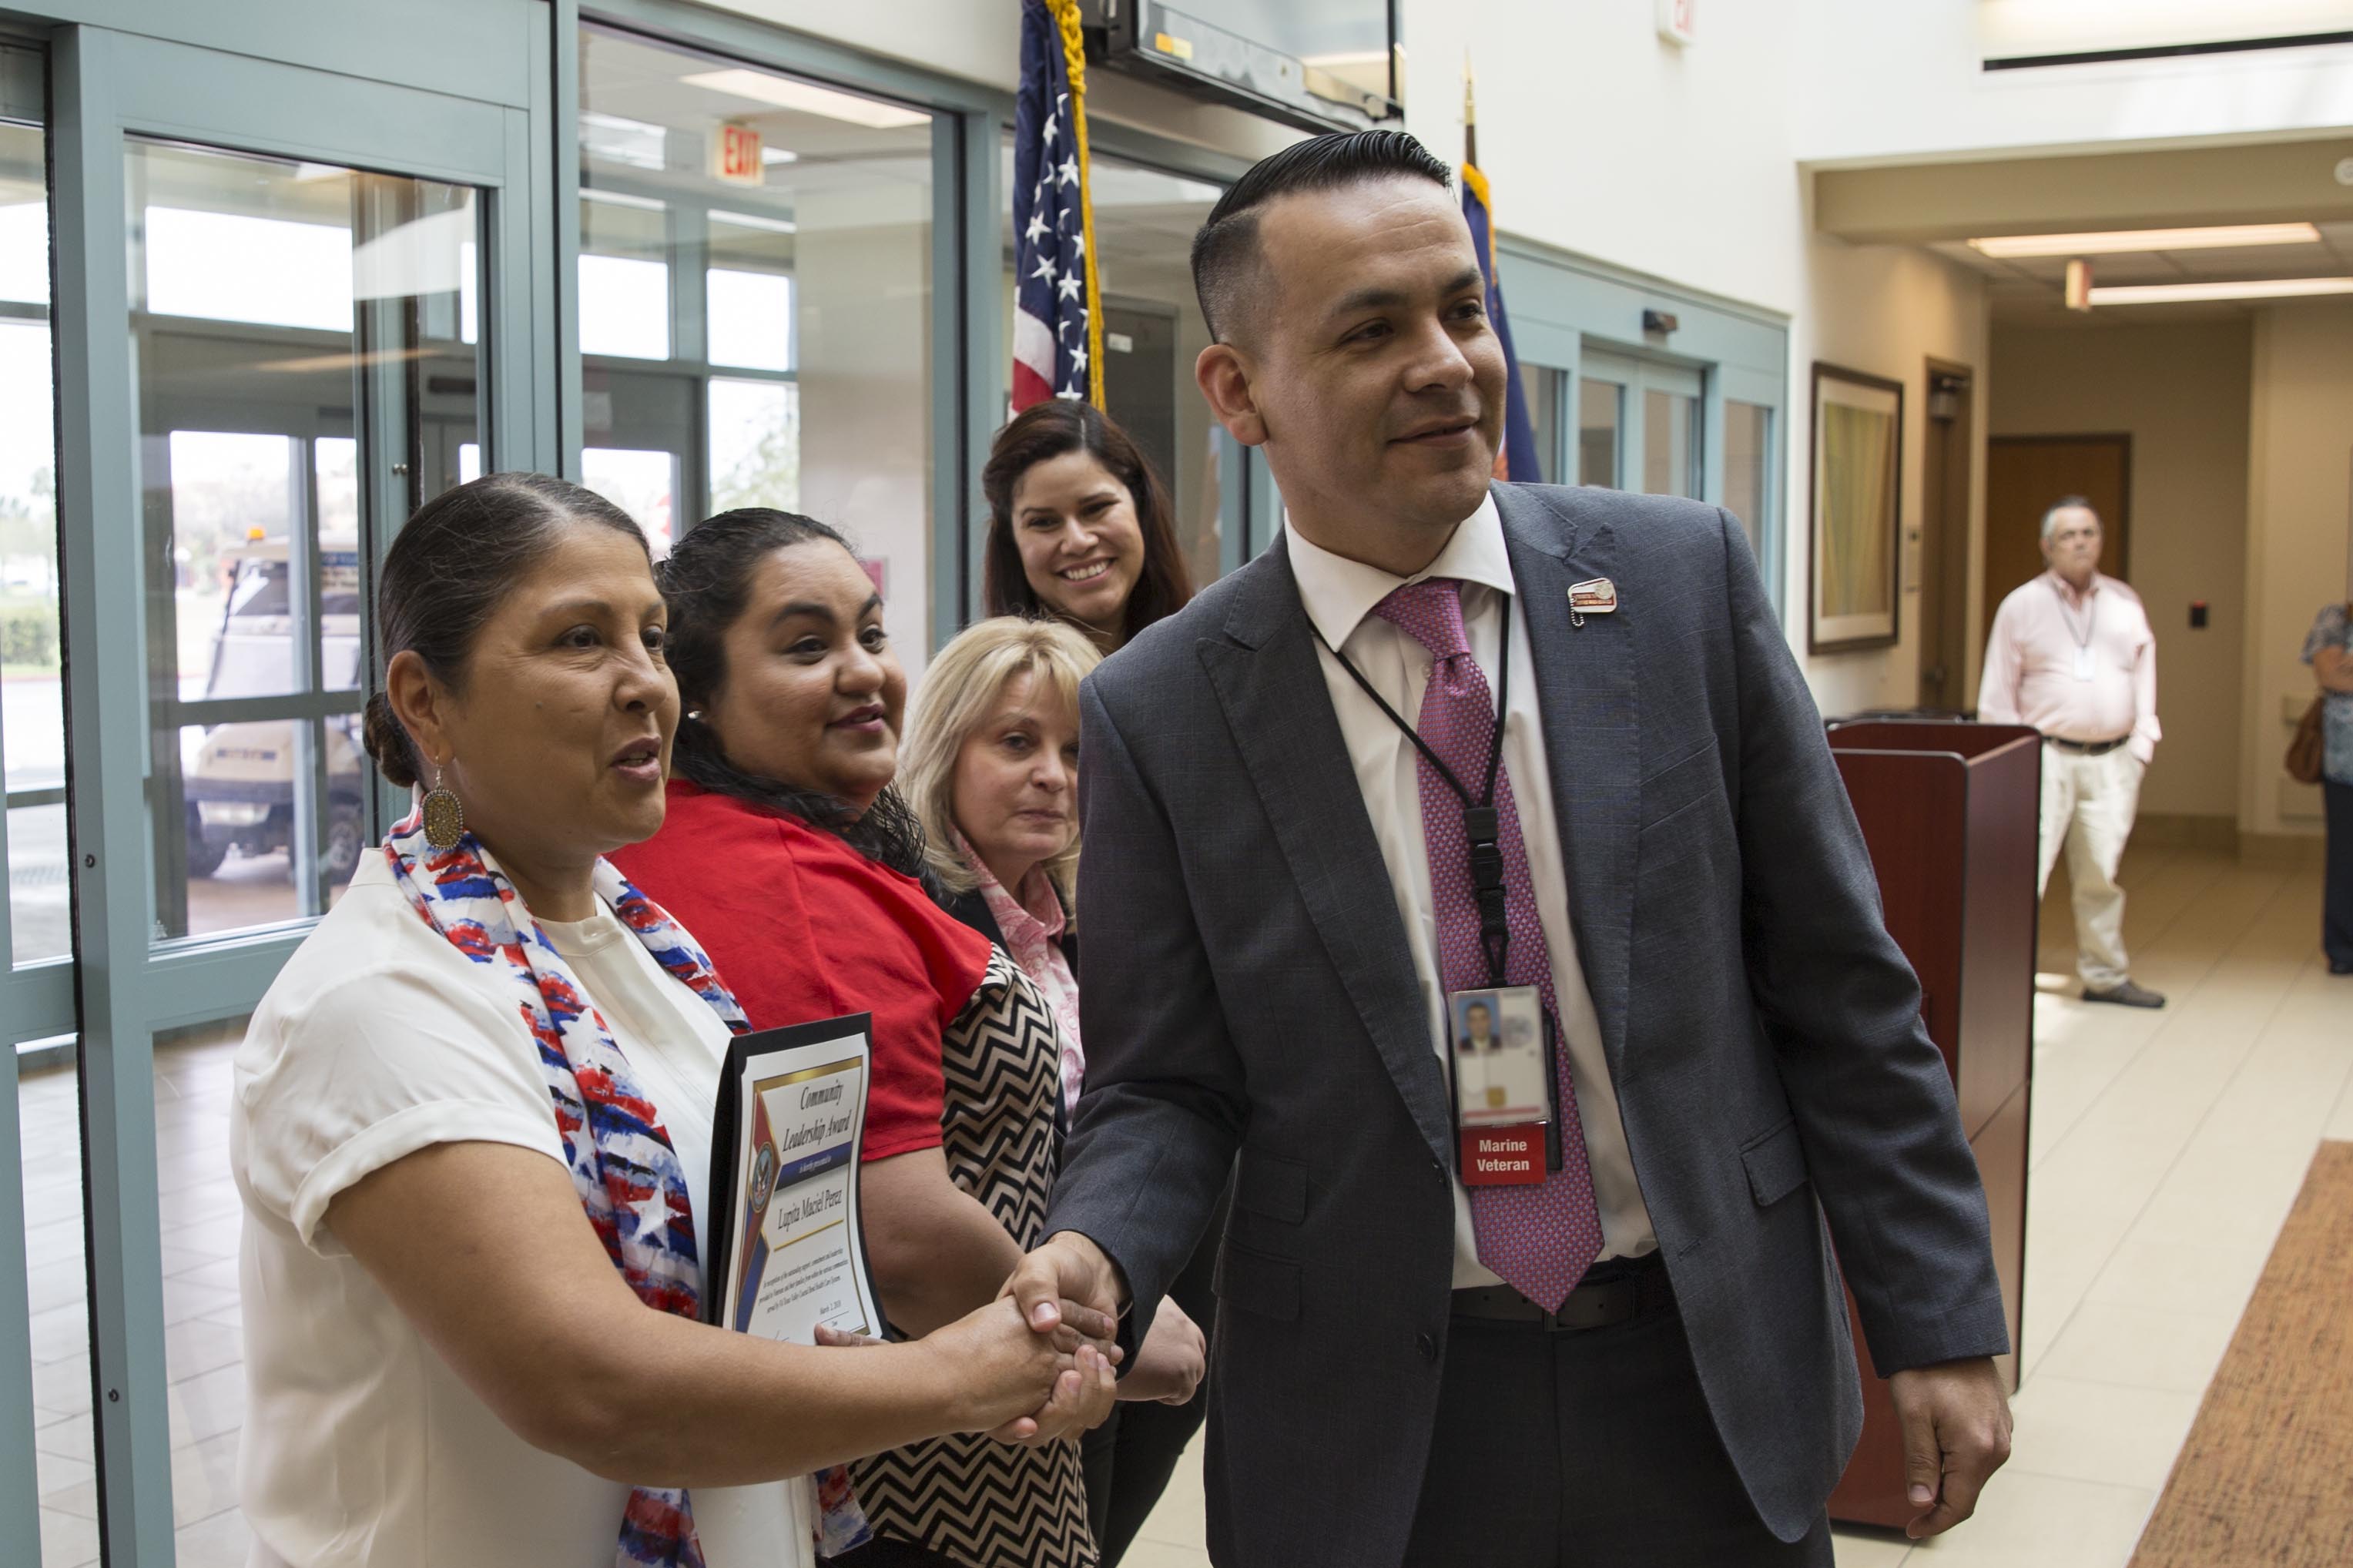 Mr. Joe A. Perez the director of VA Texas Valley Coastal Bend Health Care System gives Ms. Lupita Maciel Perez a congratulatory handshake during the health care system's ceremony held in observance of this year’s Women History Month, which took place March 2, 2018, at the VA Health Care Center at Harlingen, Texas. Ms. Maciel Perez is the junior vice commander for District 18 for the Veterans of Foreign and a national legislative committee Member for the VFW. She was one of nine Women Veterans from local communities to receive a VA Community Leadership Award for their advocacy and work in benefit of Veterans and their families. (U.S. Department of Veterans Affairs photo/Luis H. Loza Gutierrez)